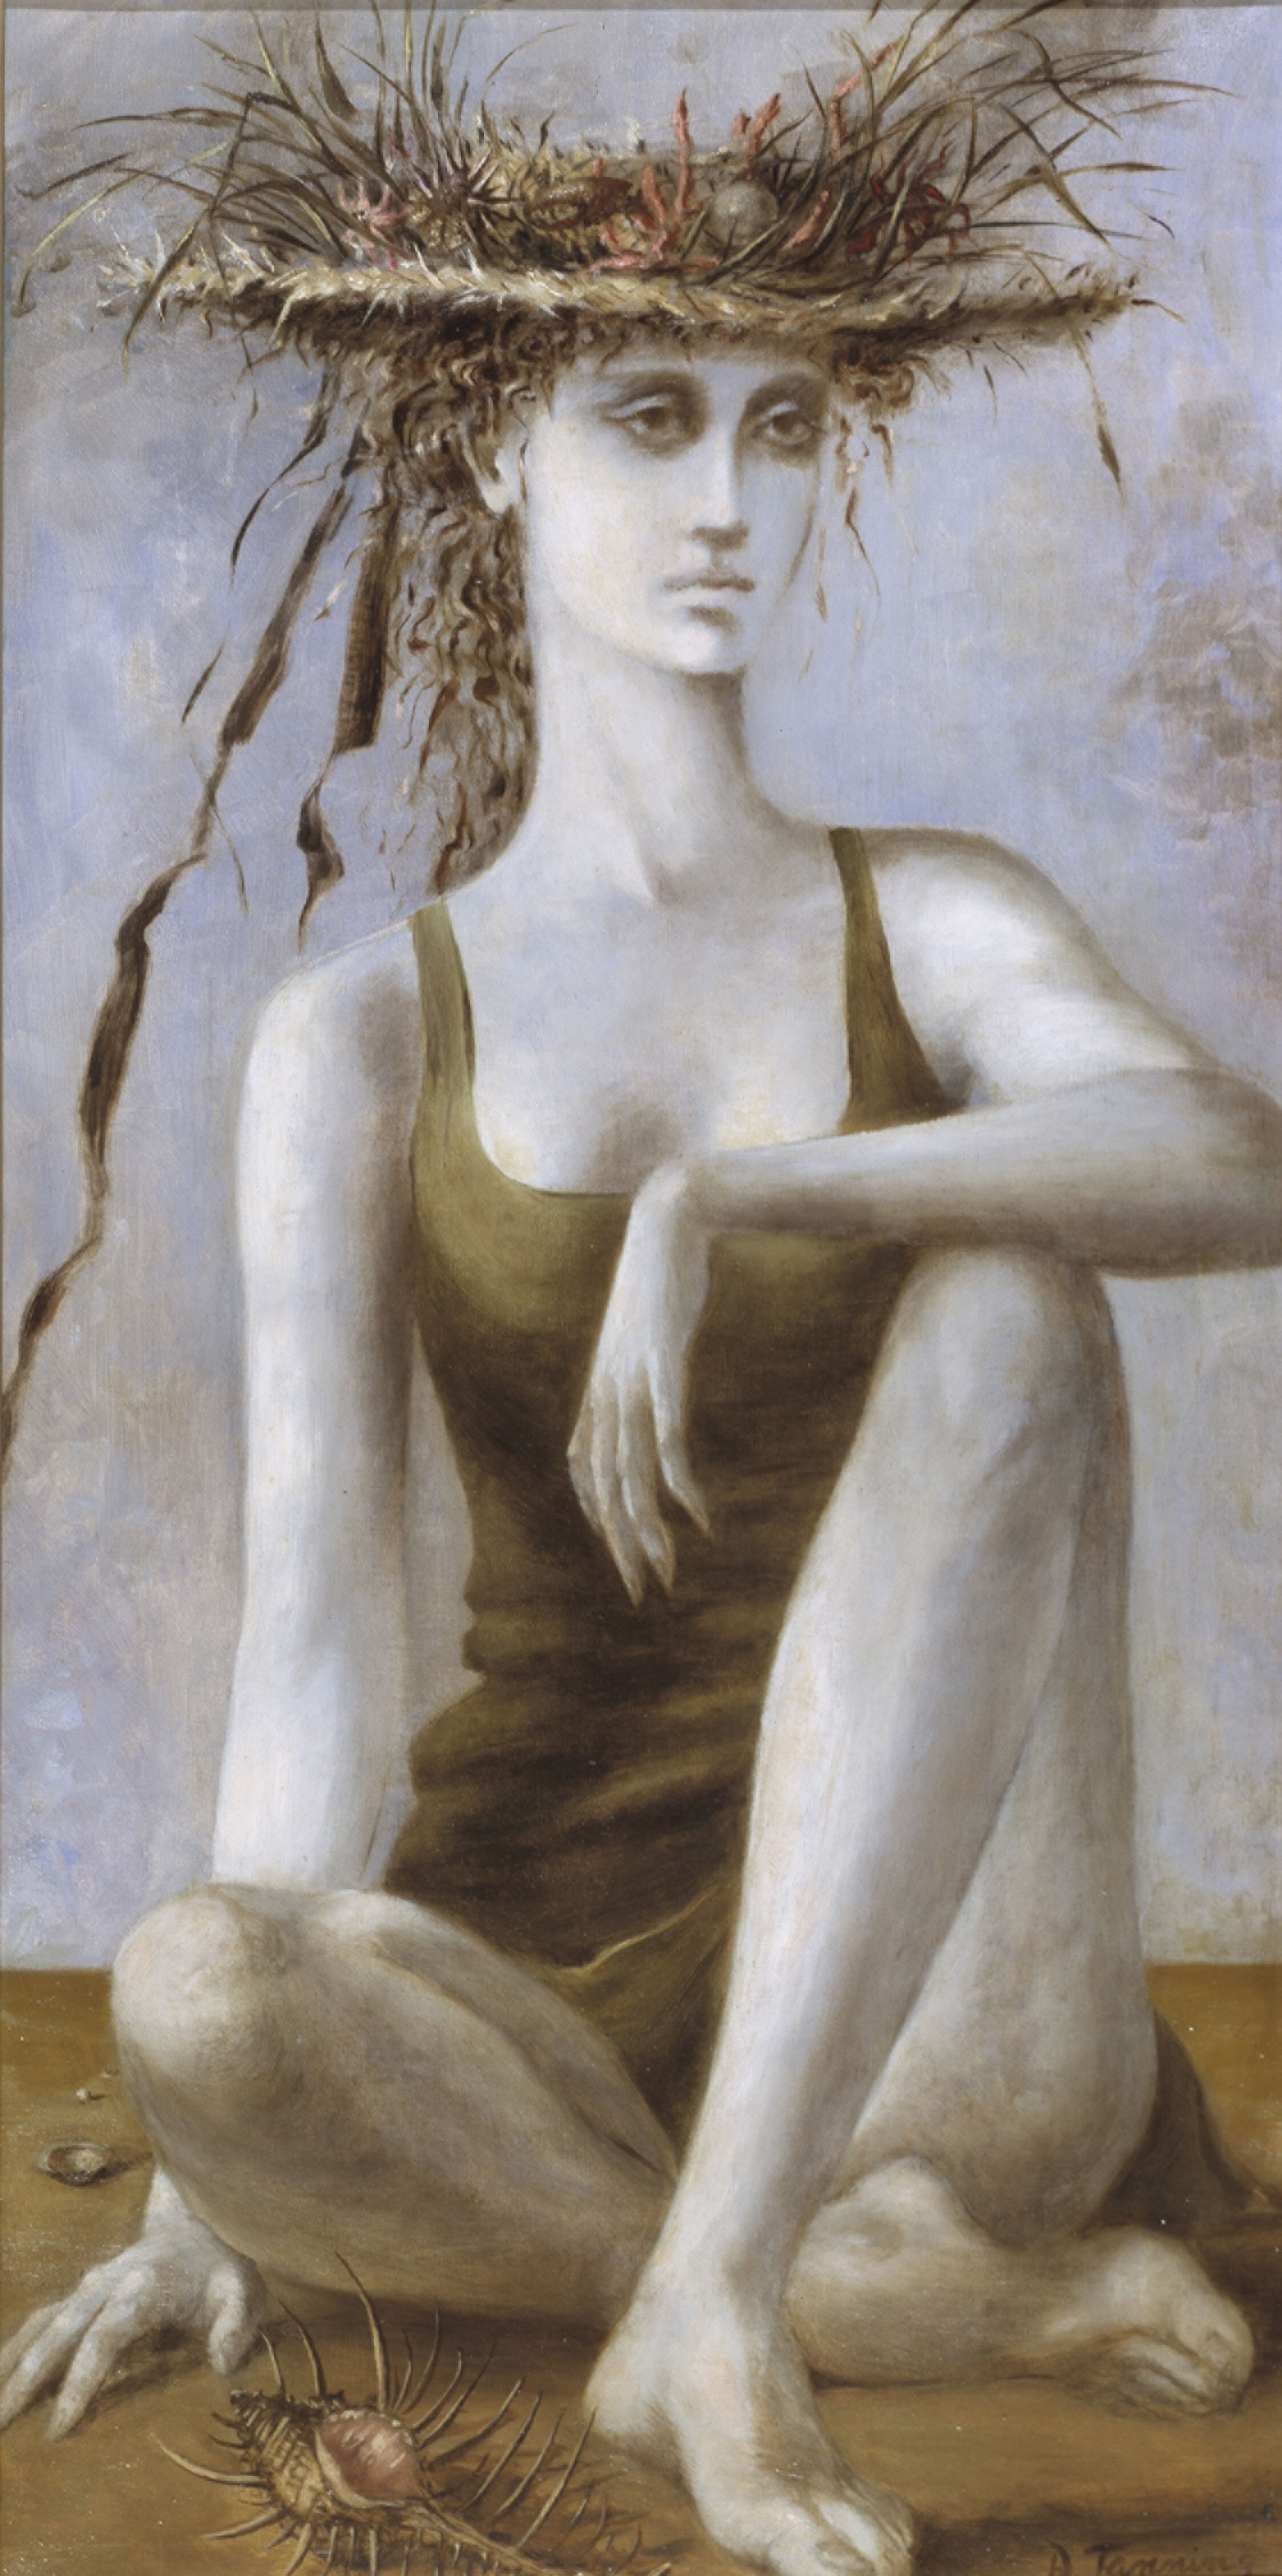  Dorothea Tanning,  Beyond the Esplanade , 1940, oil on canvas, 29 x 14 1/4 inches (74 x 36 cm) 